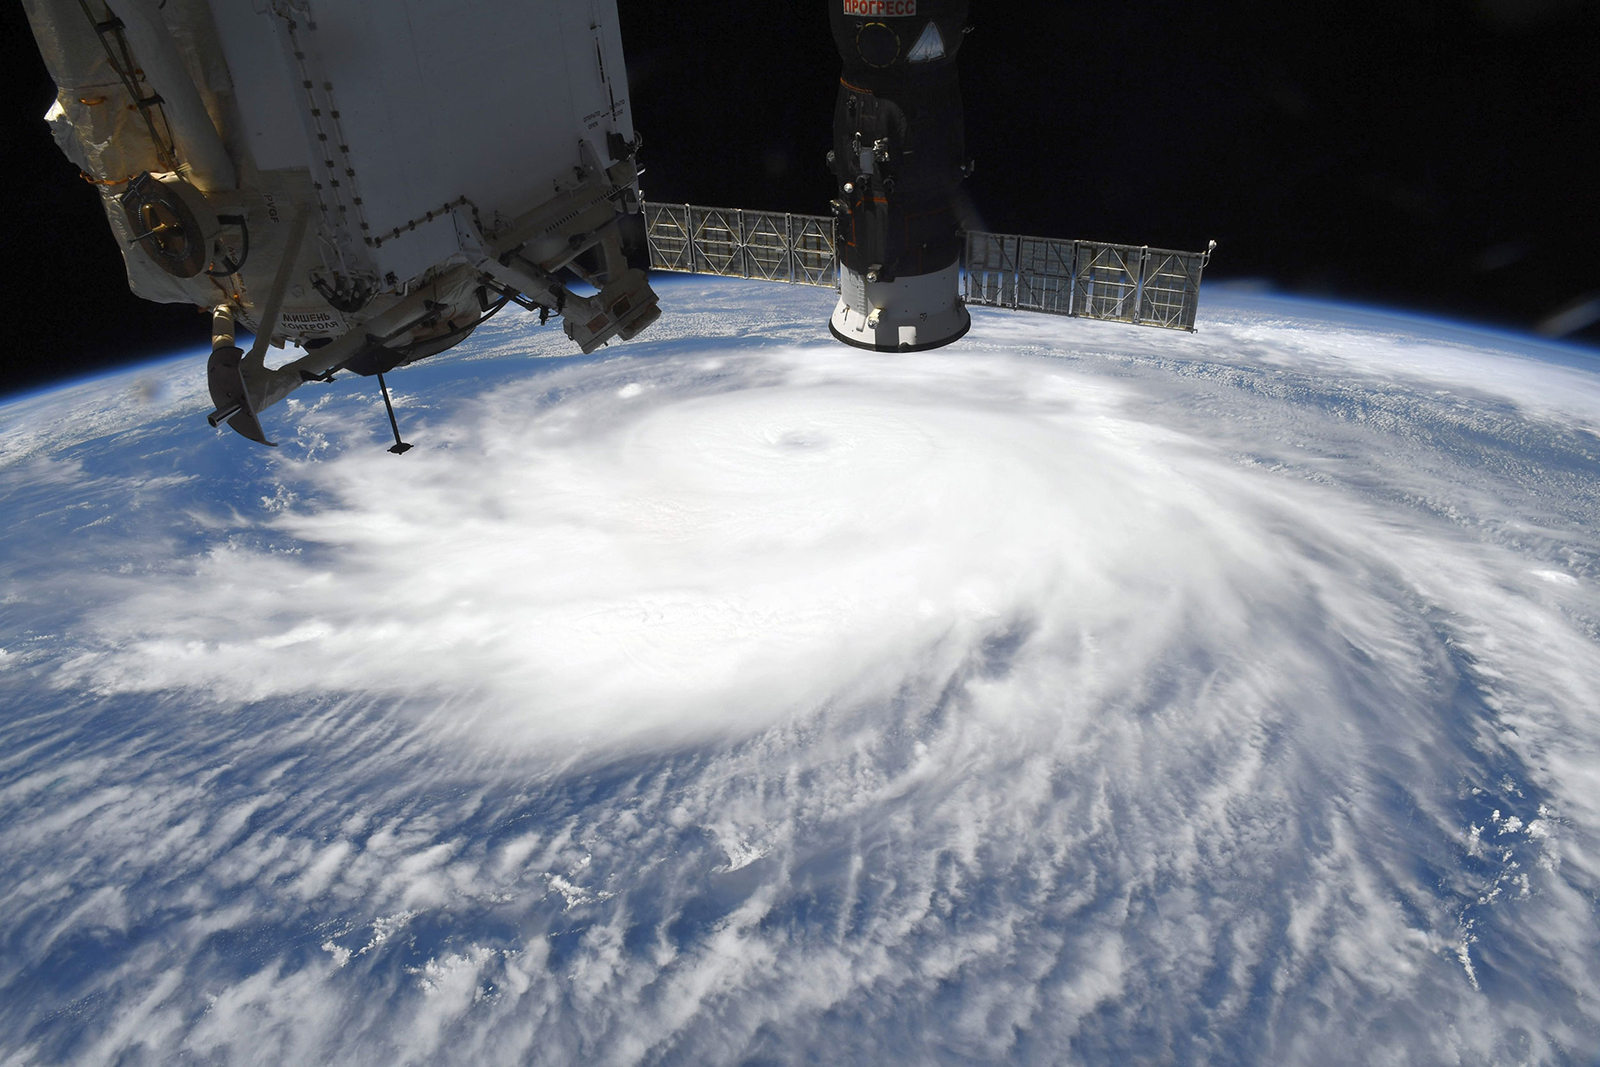 This photo of Hurricane Laura was taken aboard the International Space Station on Wednesday, August 26.